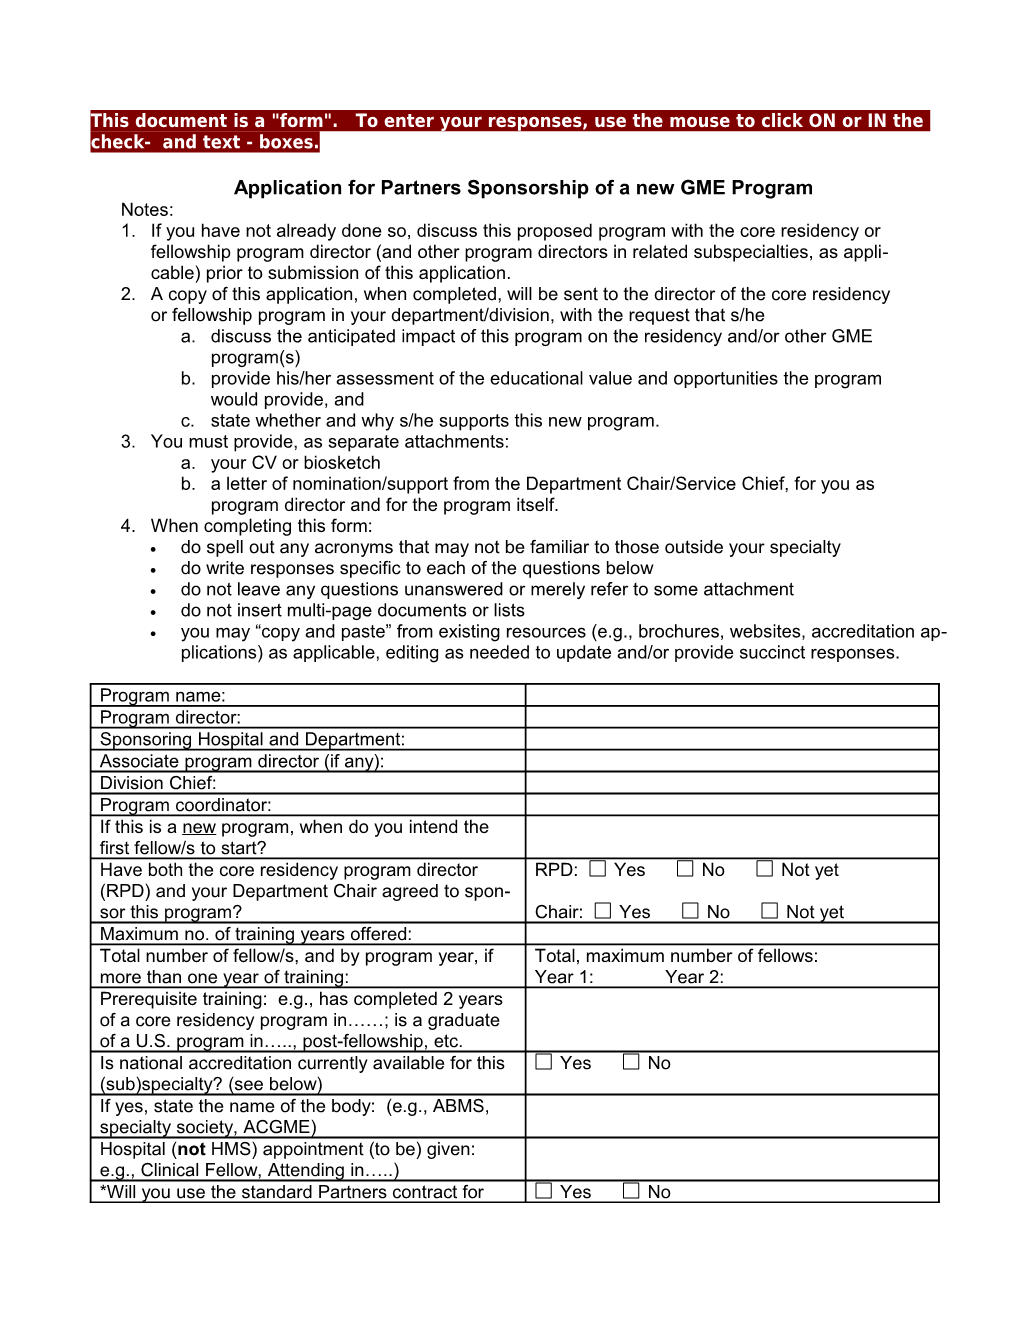 Application for Partners Sponsorship of a New GME Program